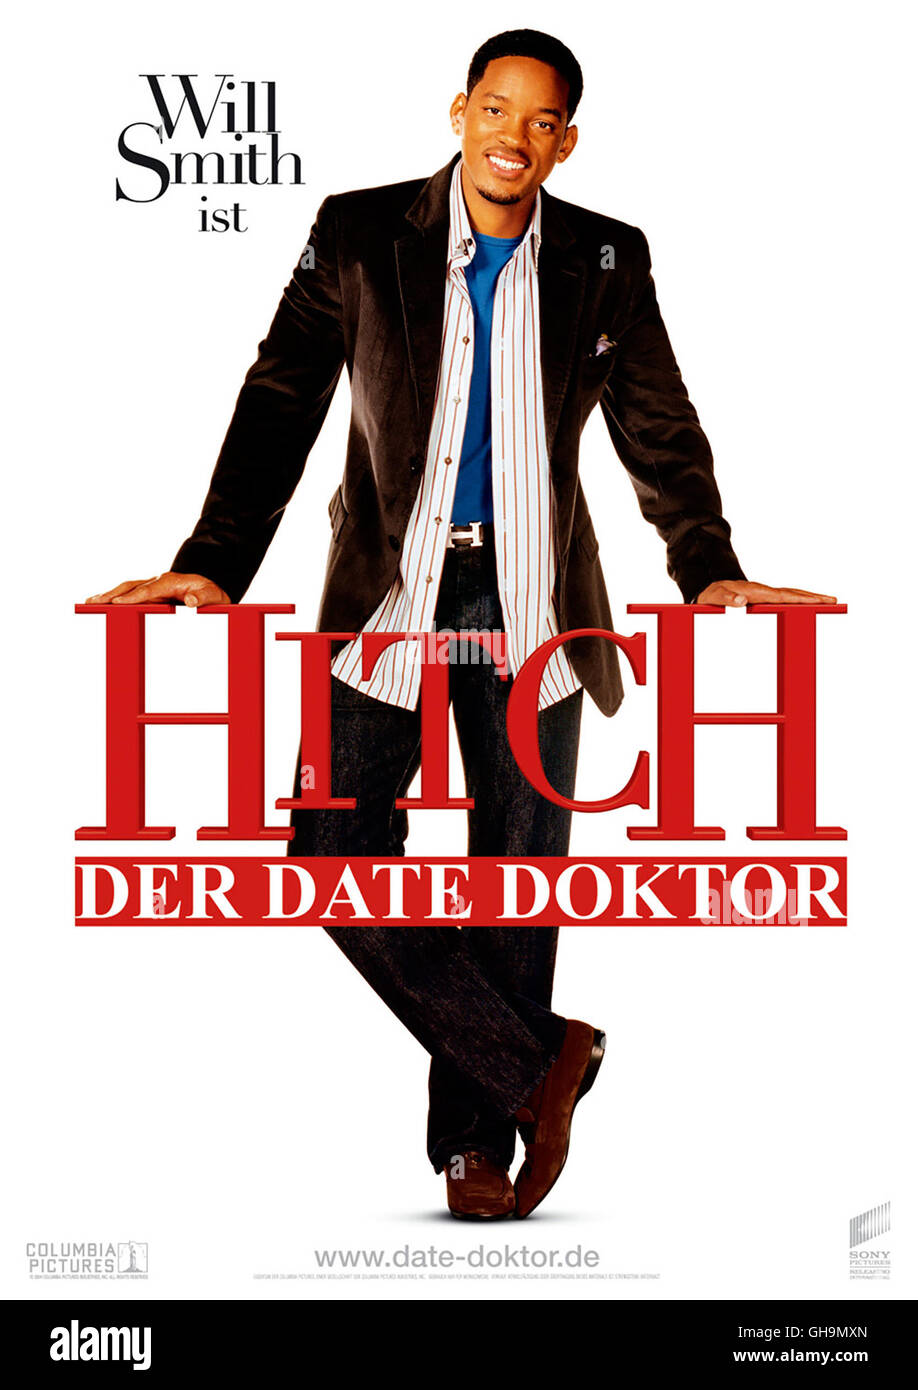 HITCH - DER DATE DOKTOR Hitch USA 2005 Andy Tennant Filmplakat Regie: Andy Tennant aka. Hitch Stock Photo